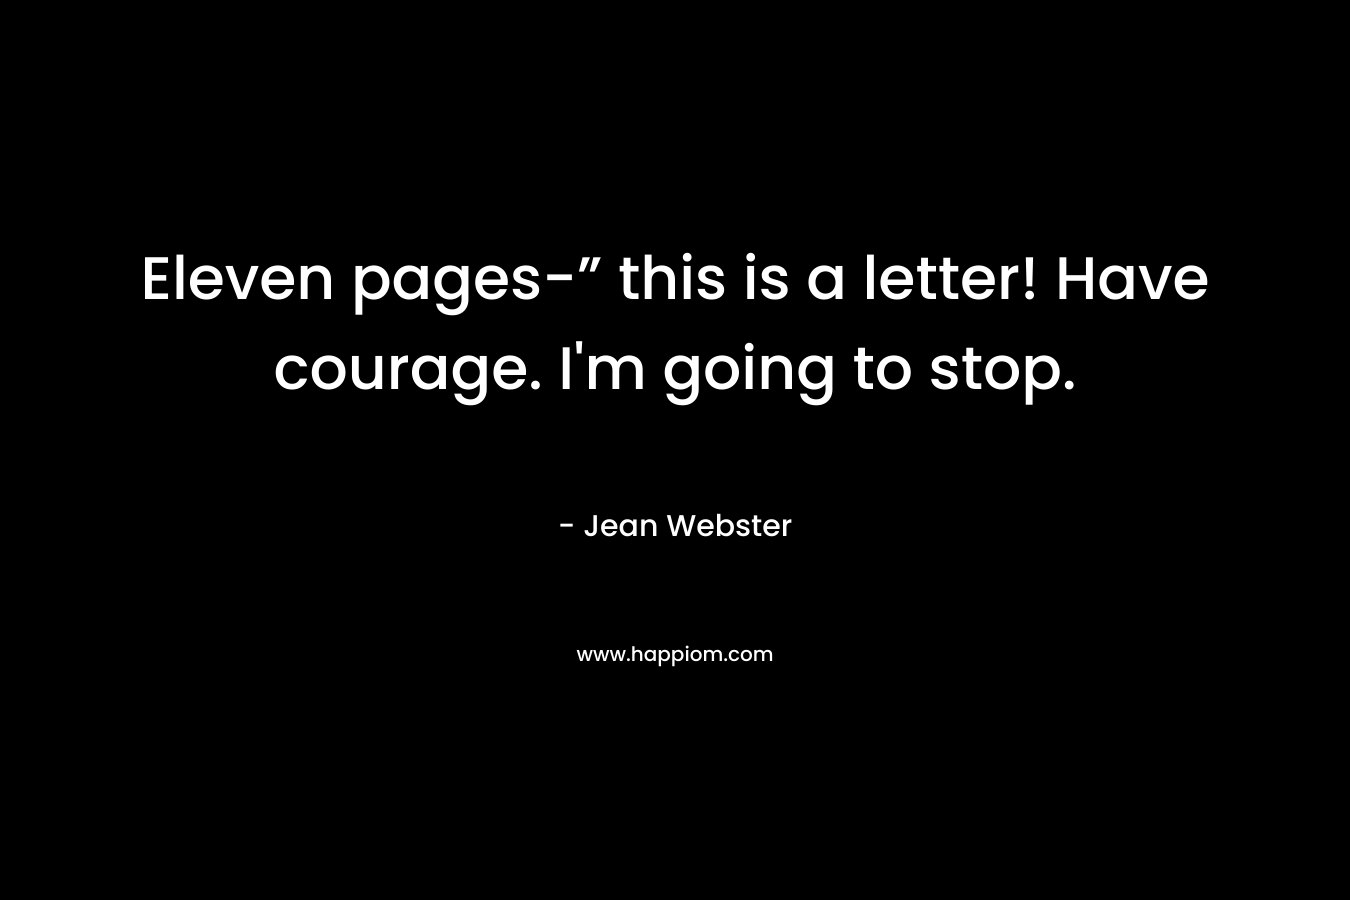 Eleven pages-” this is a letter! Have courage. I'm going to stop.